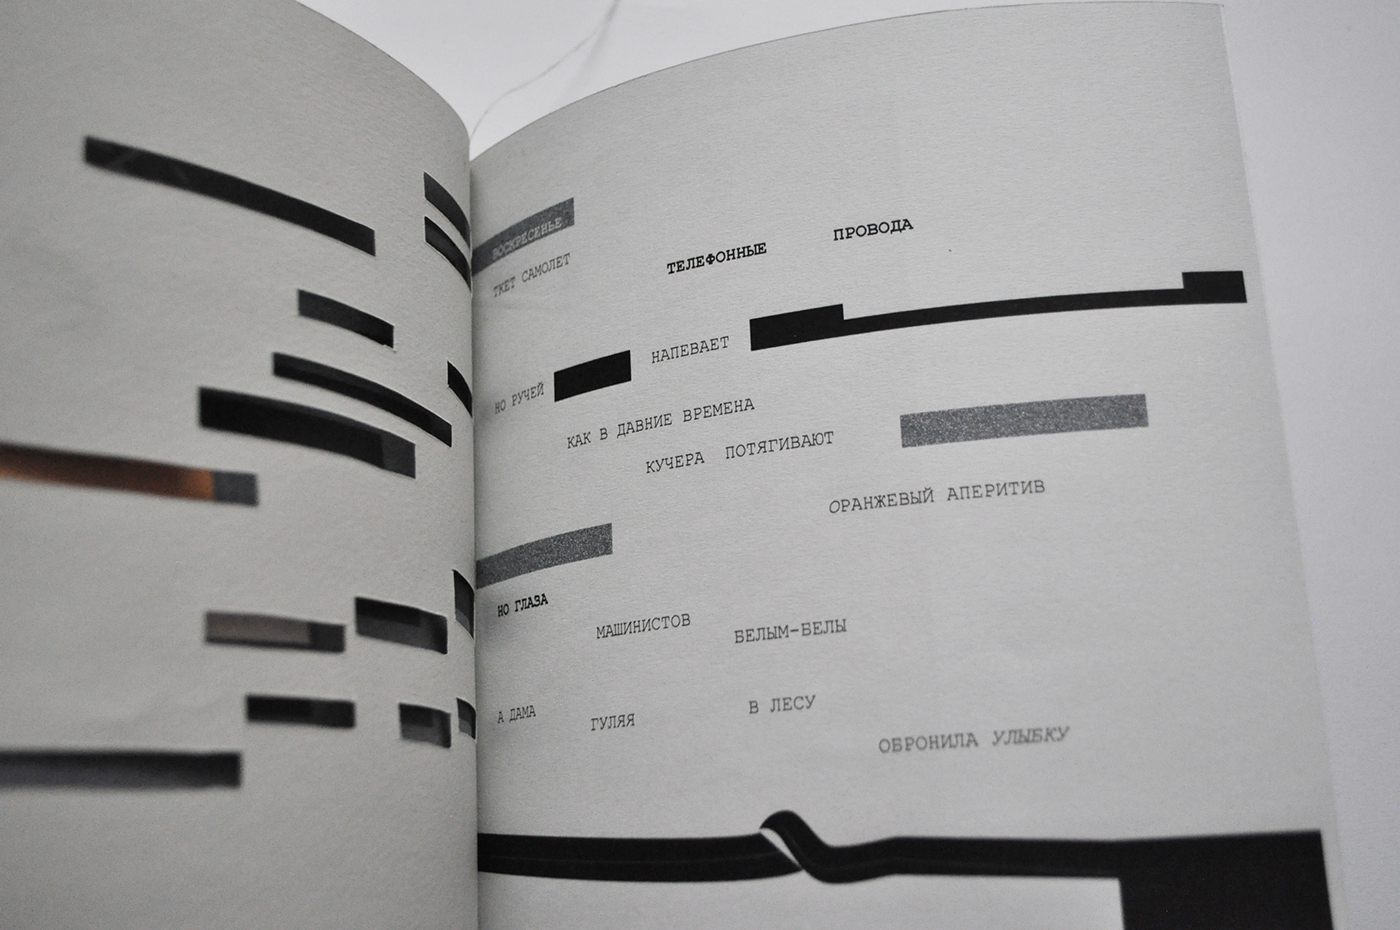 Dada typography   graphic Poetry  book